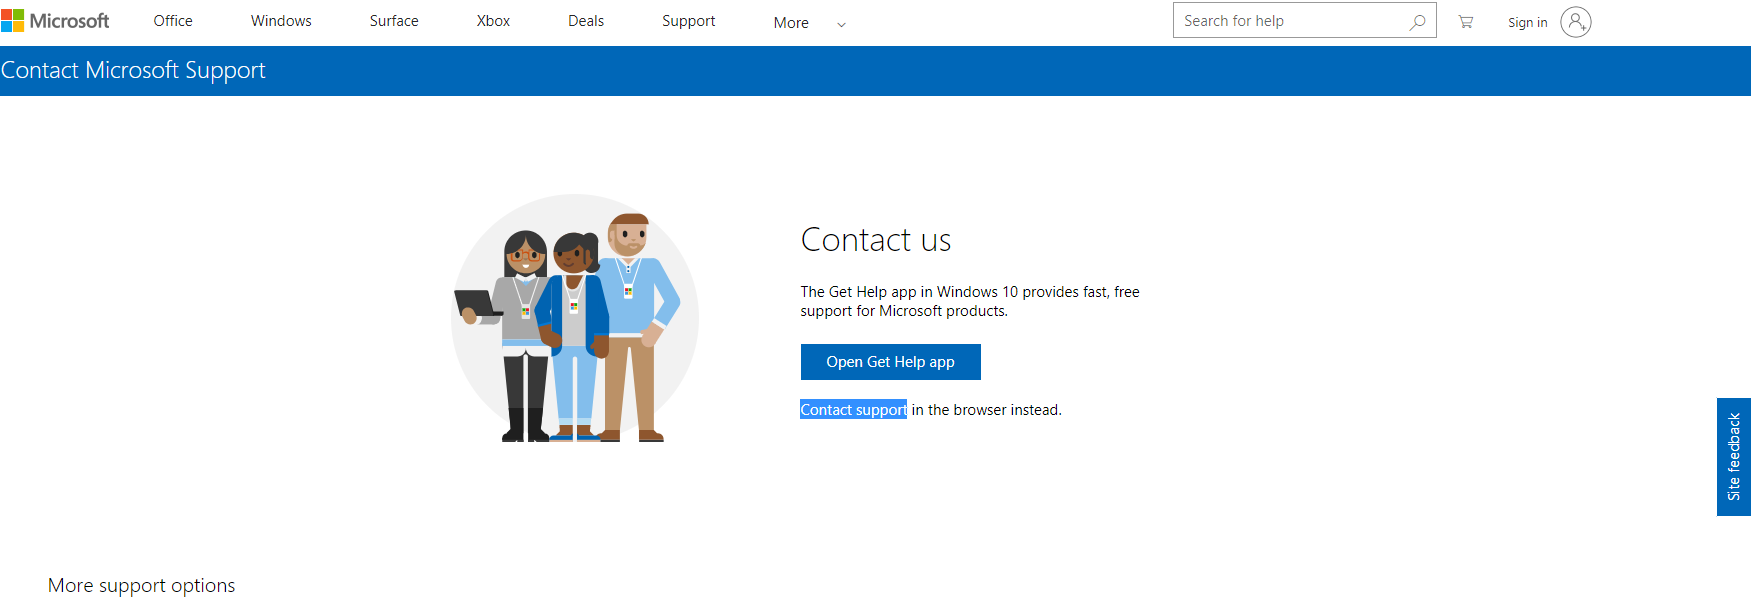 C support microsoft. MS-contact-support.